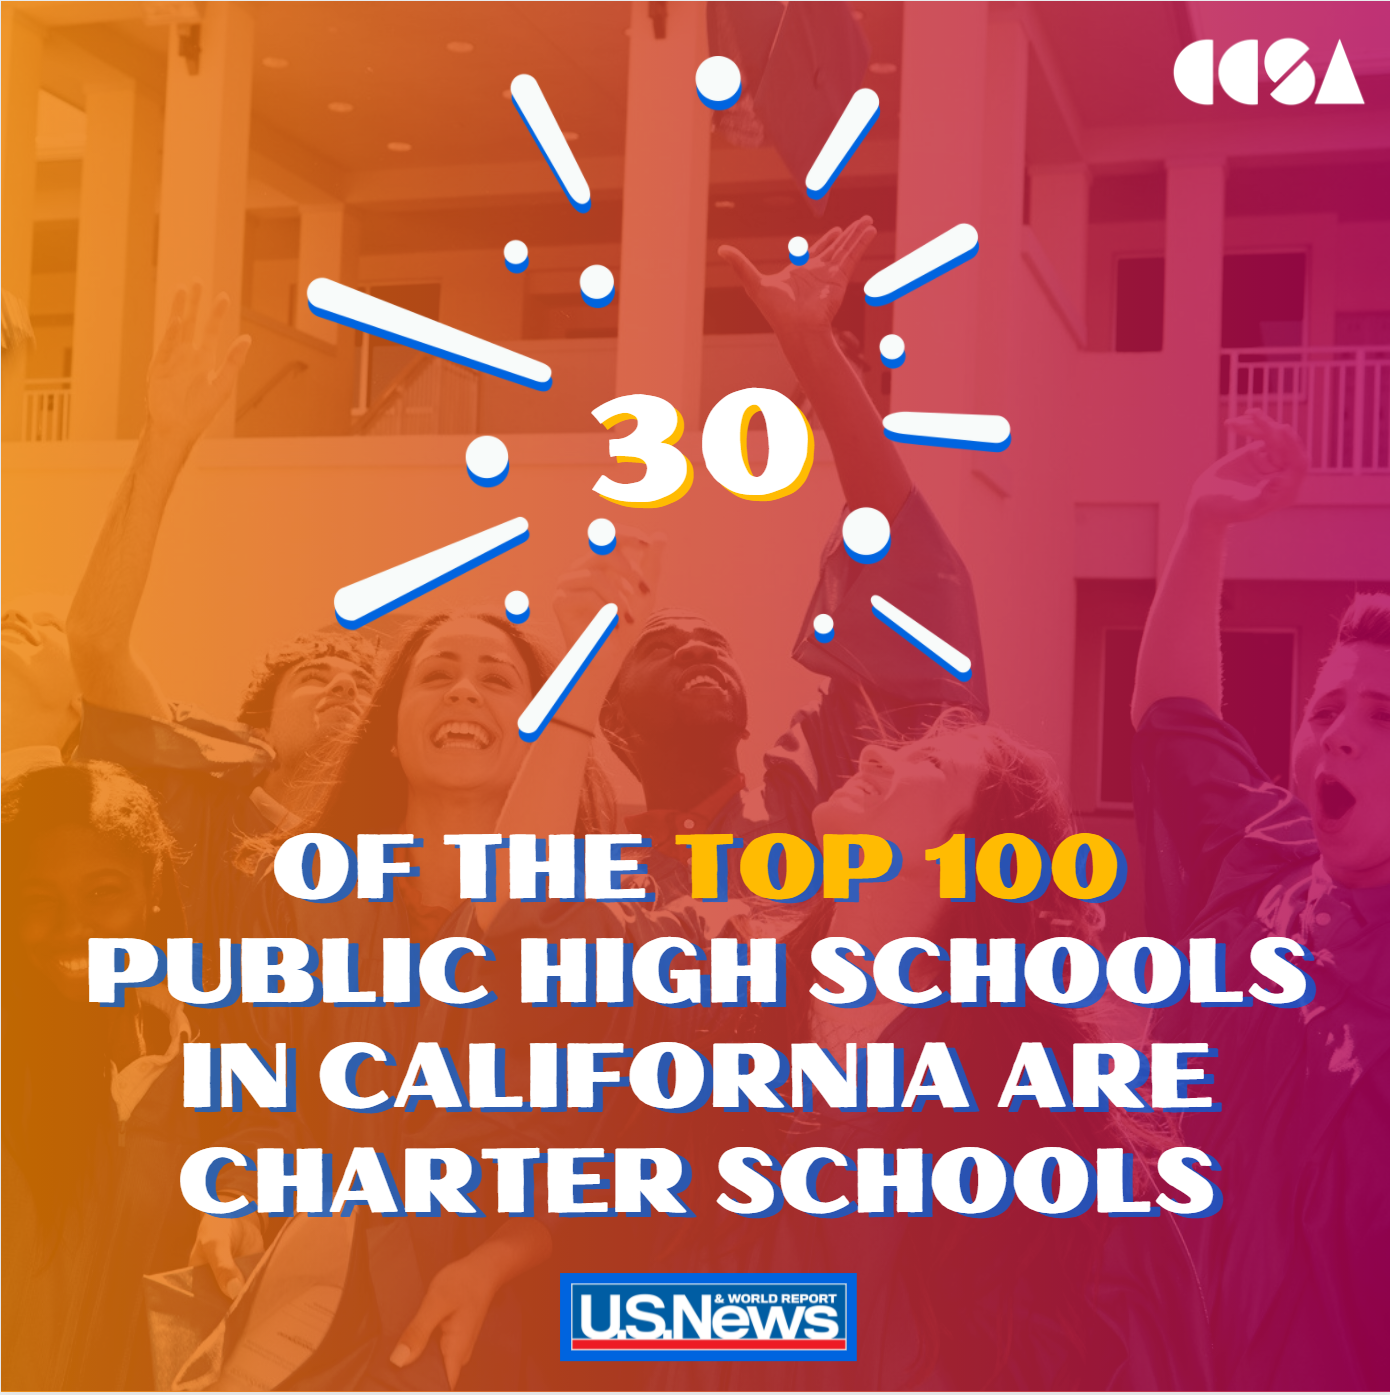 30 of Top 100 schools according to U.S. News and world Rreports 